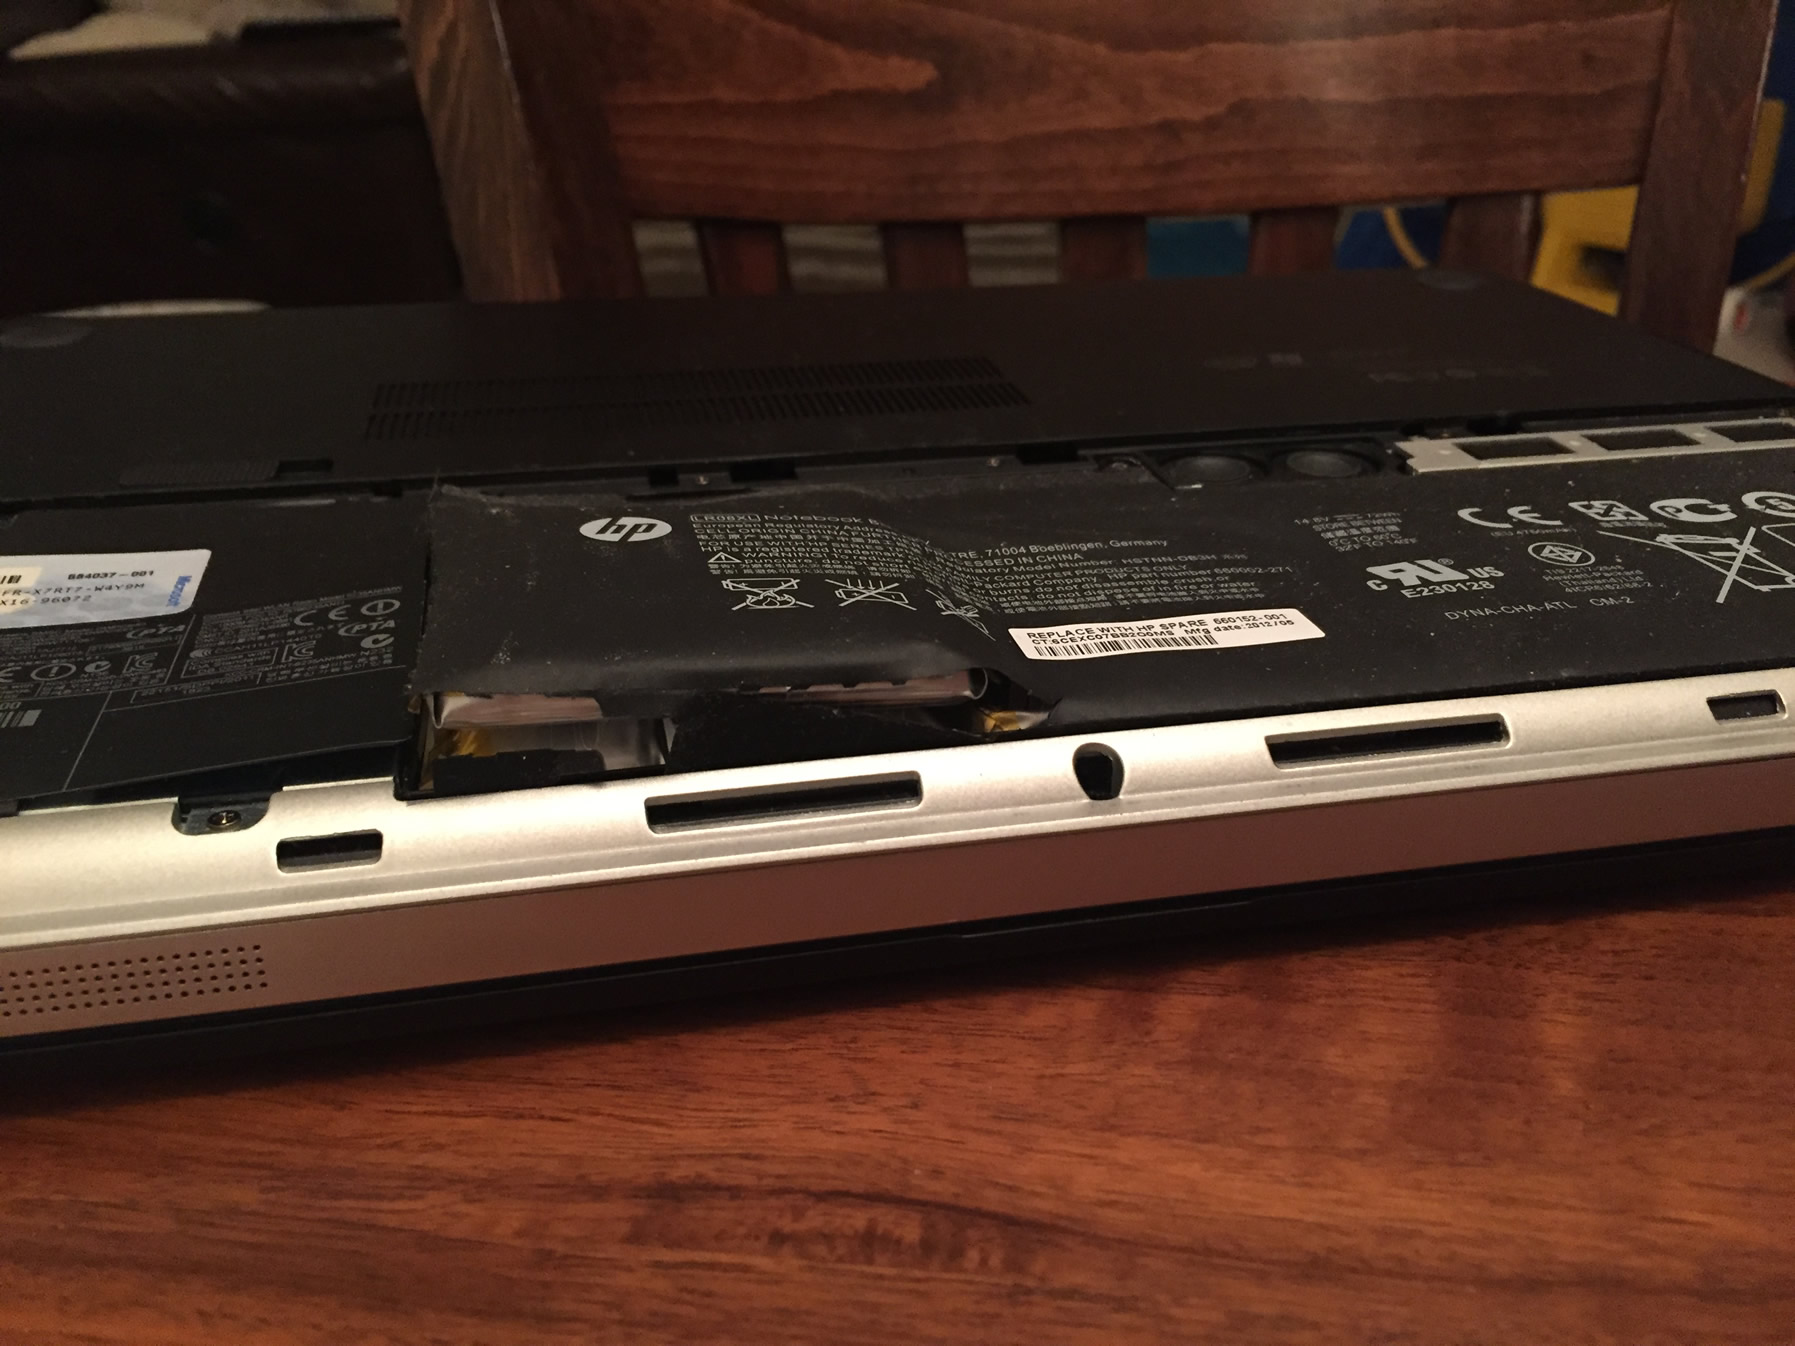 HP Envy 15 SEVERE BATTERY SWELLING - HP Support Community - 6304951